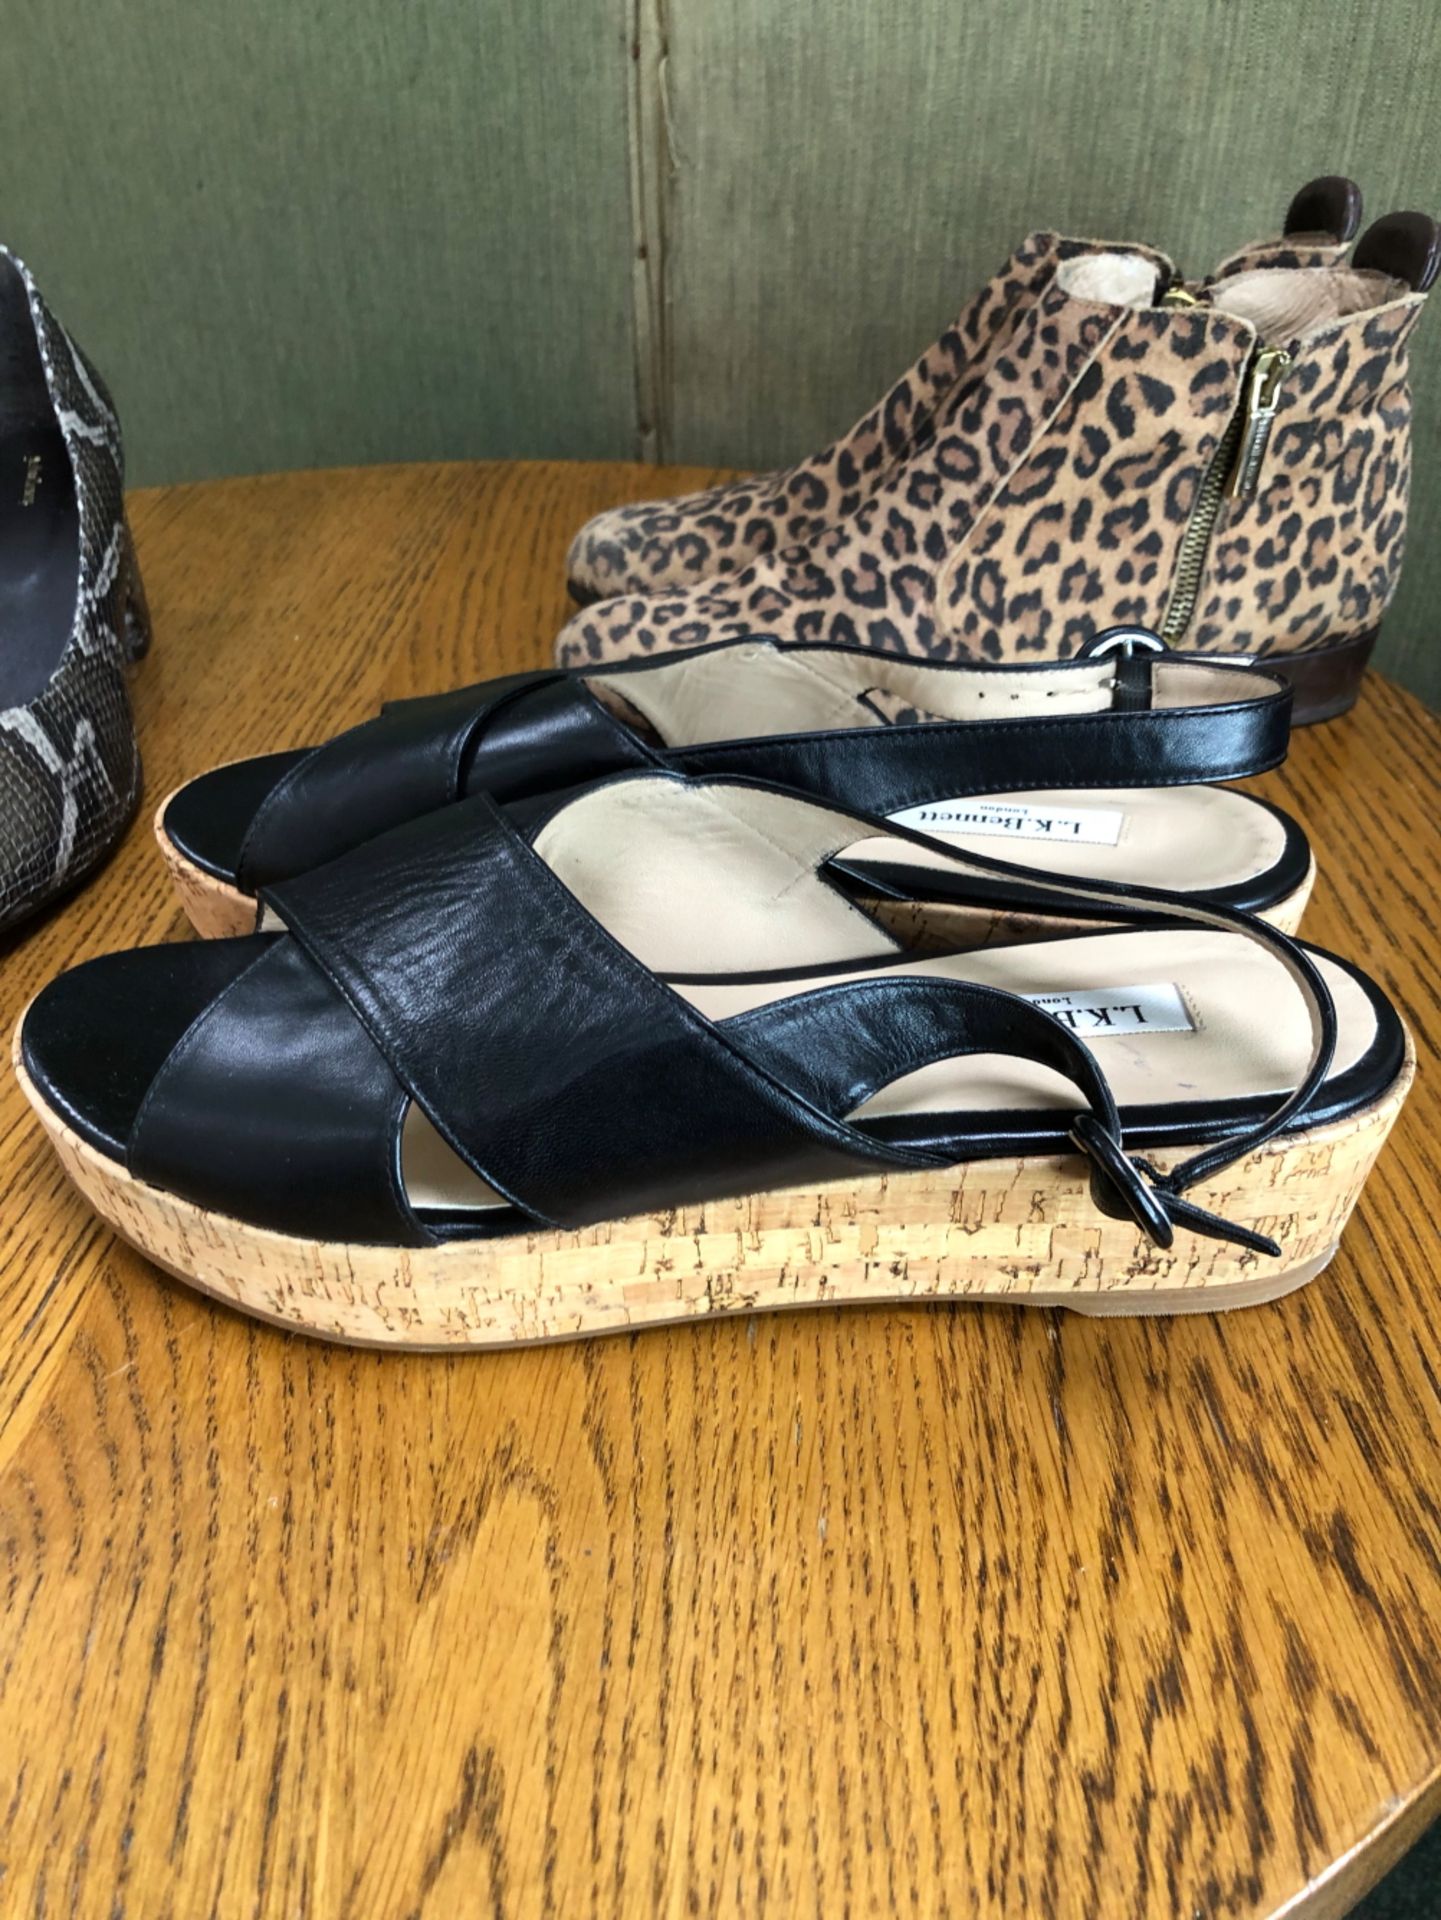 SHOES: A PAIR OF L.K BENNETT CORKED PLATFORM BLACK SANDALS EU SIZE 41, TOGETHER WITH A PAIR OF - Image 7 of 10